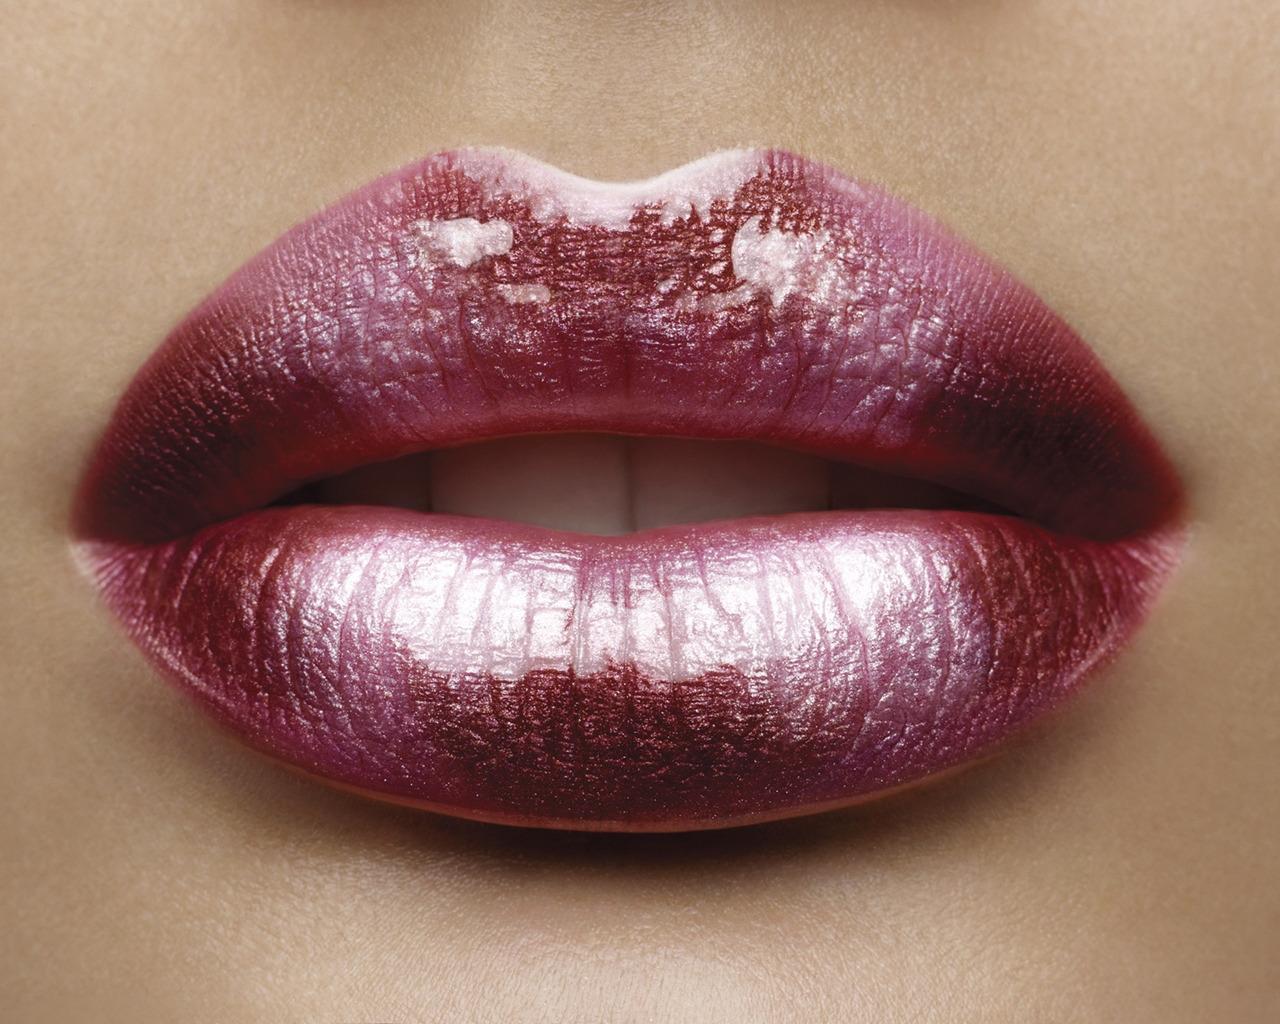 Just my Lips for 1280 x 1024 resolution